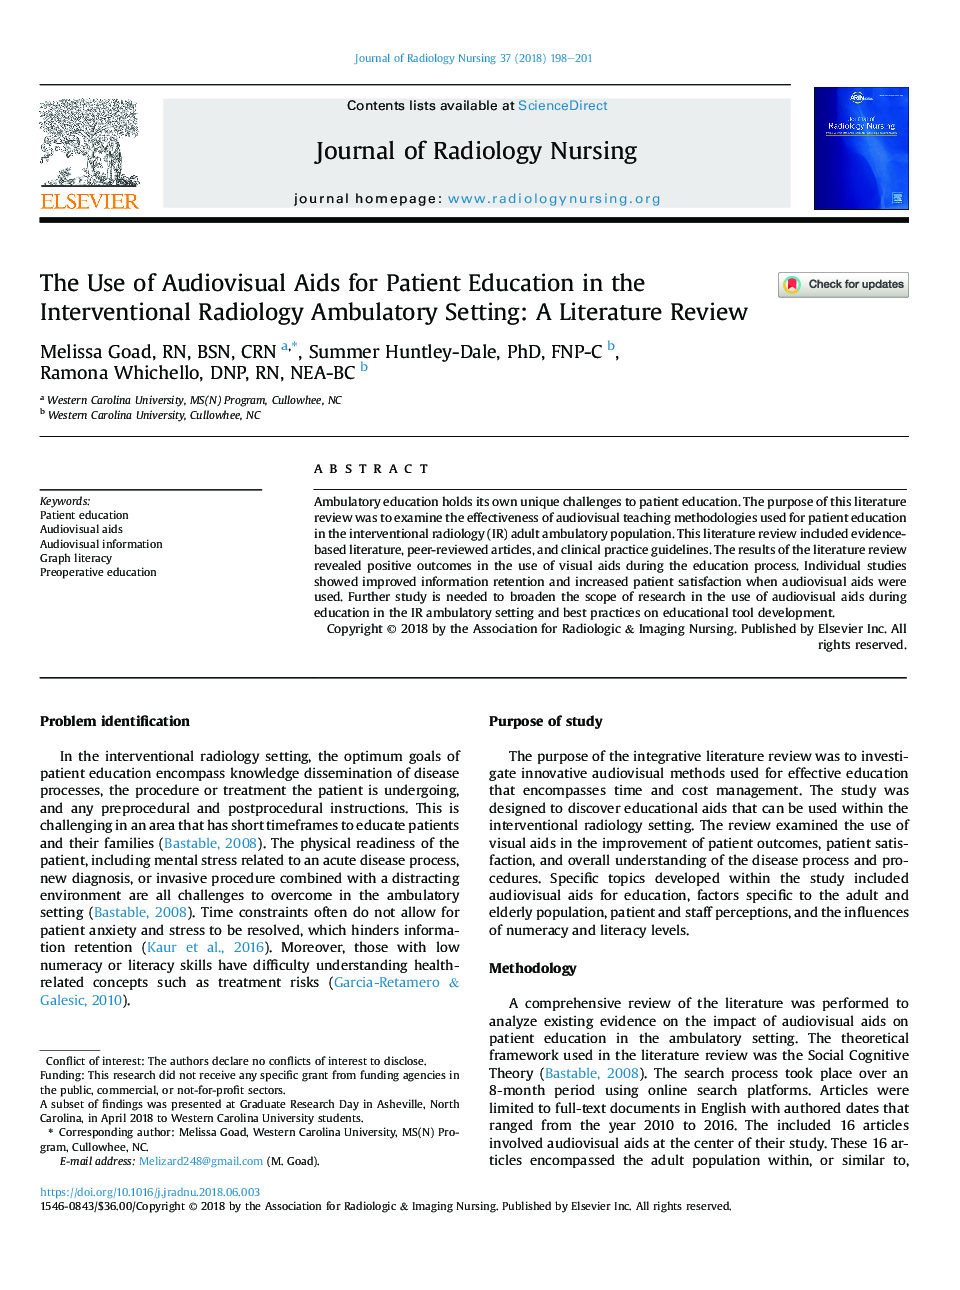 The Use of Audiovisual Aids for Patient Education in the Interventional Radiology Ambulatory Setting: A Literature Review